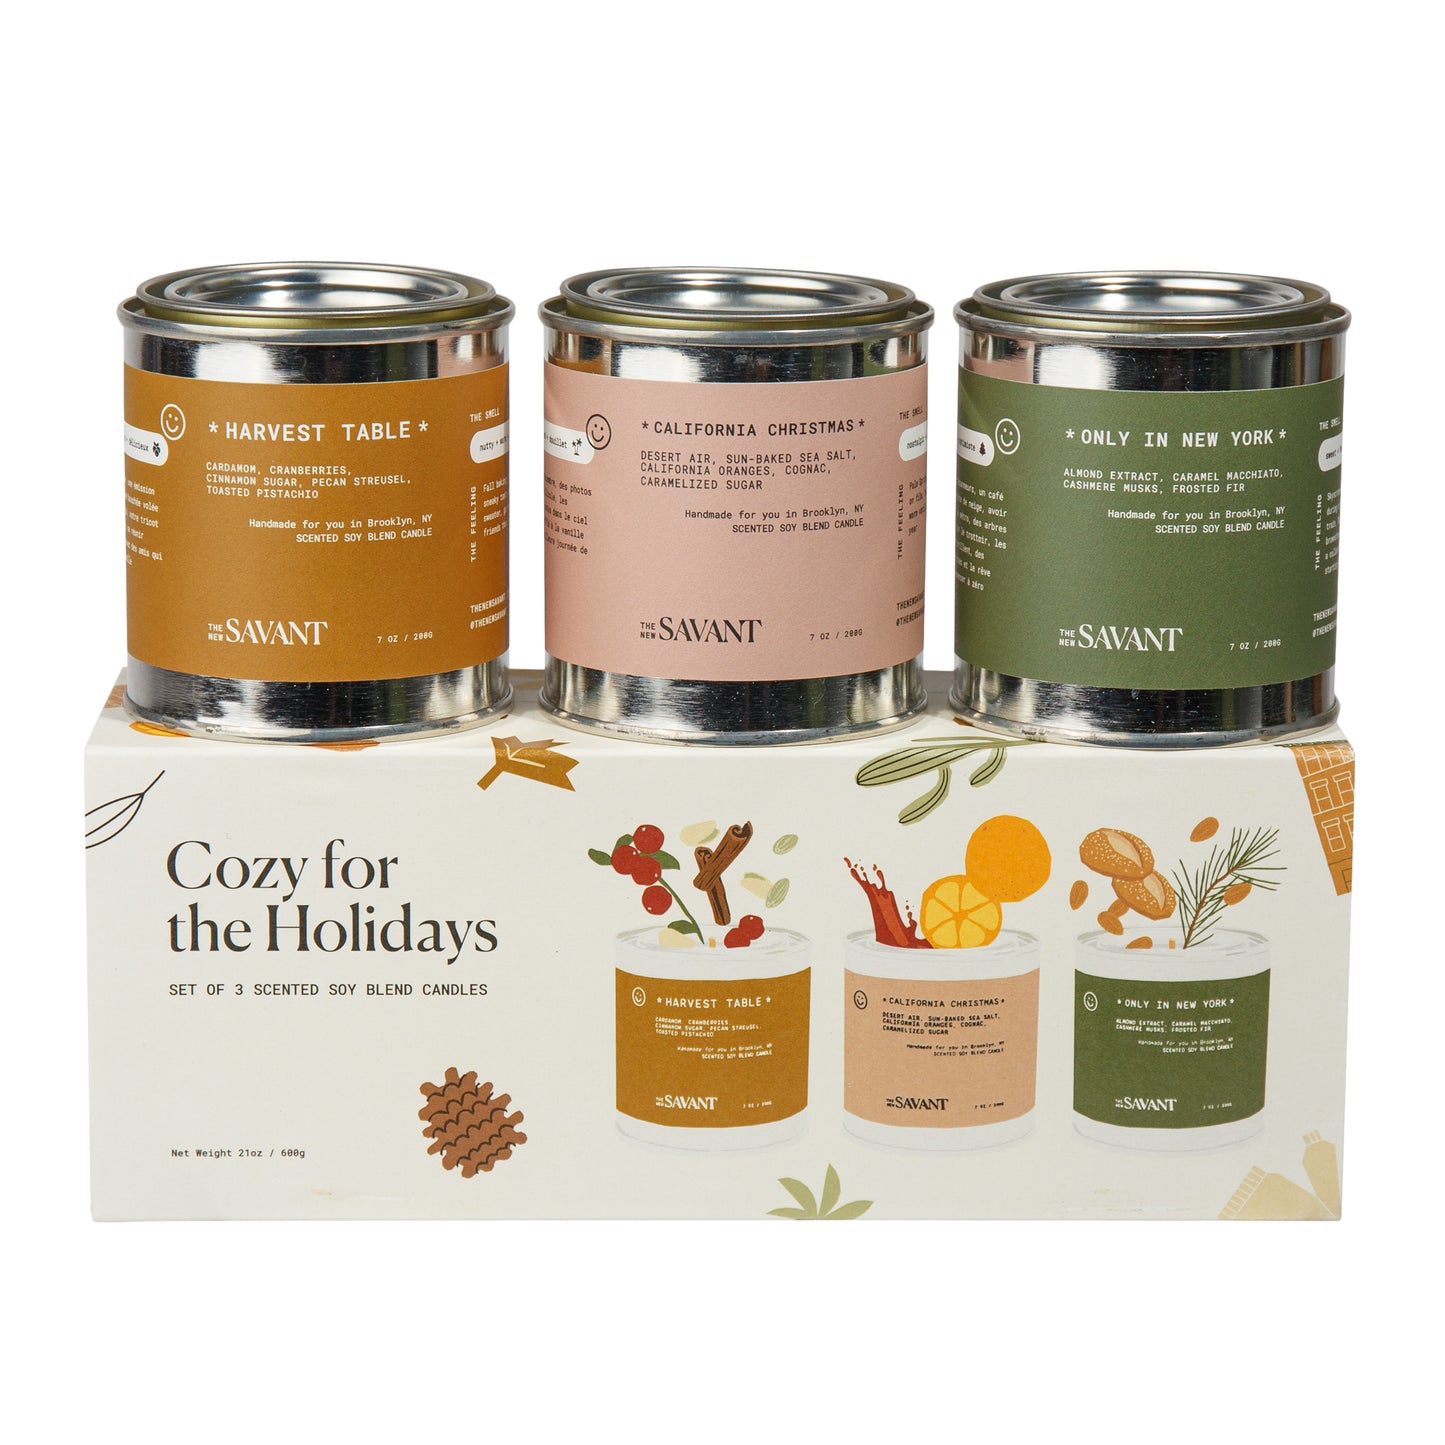 Primary Image of Cozy for the Holidays Candle Set